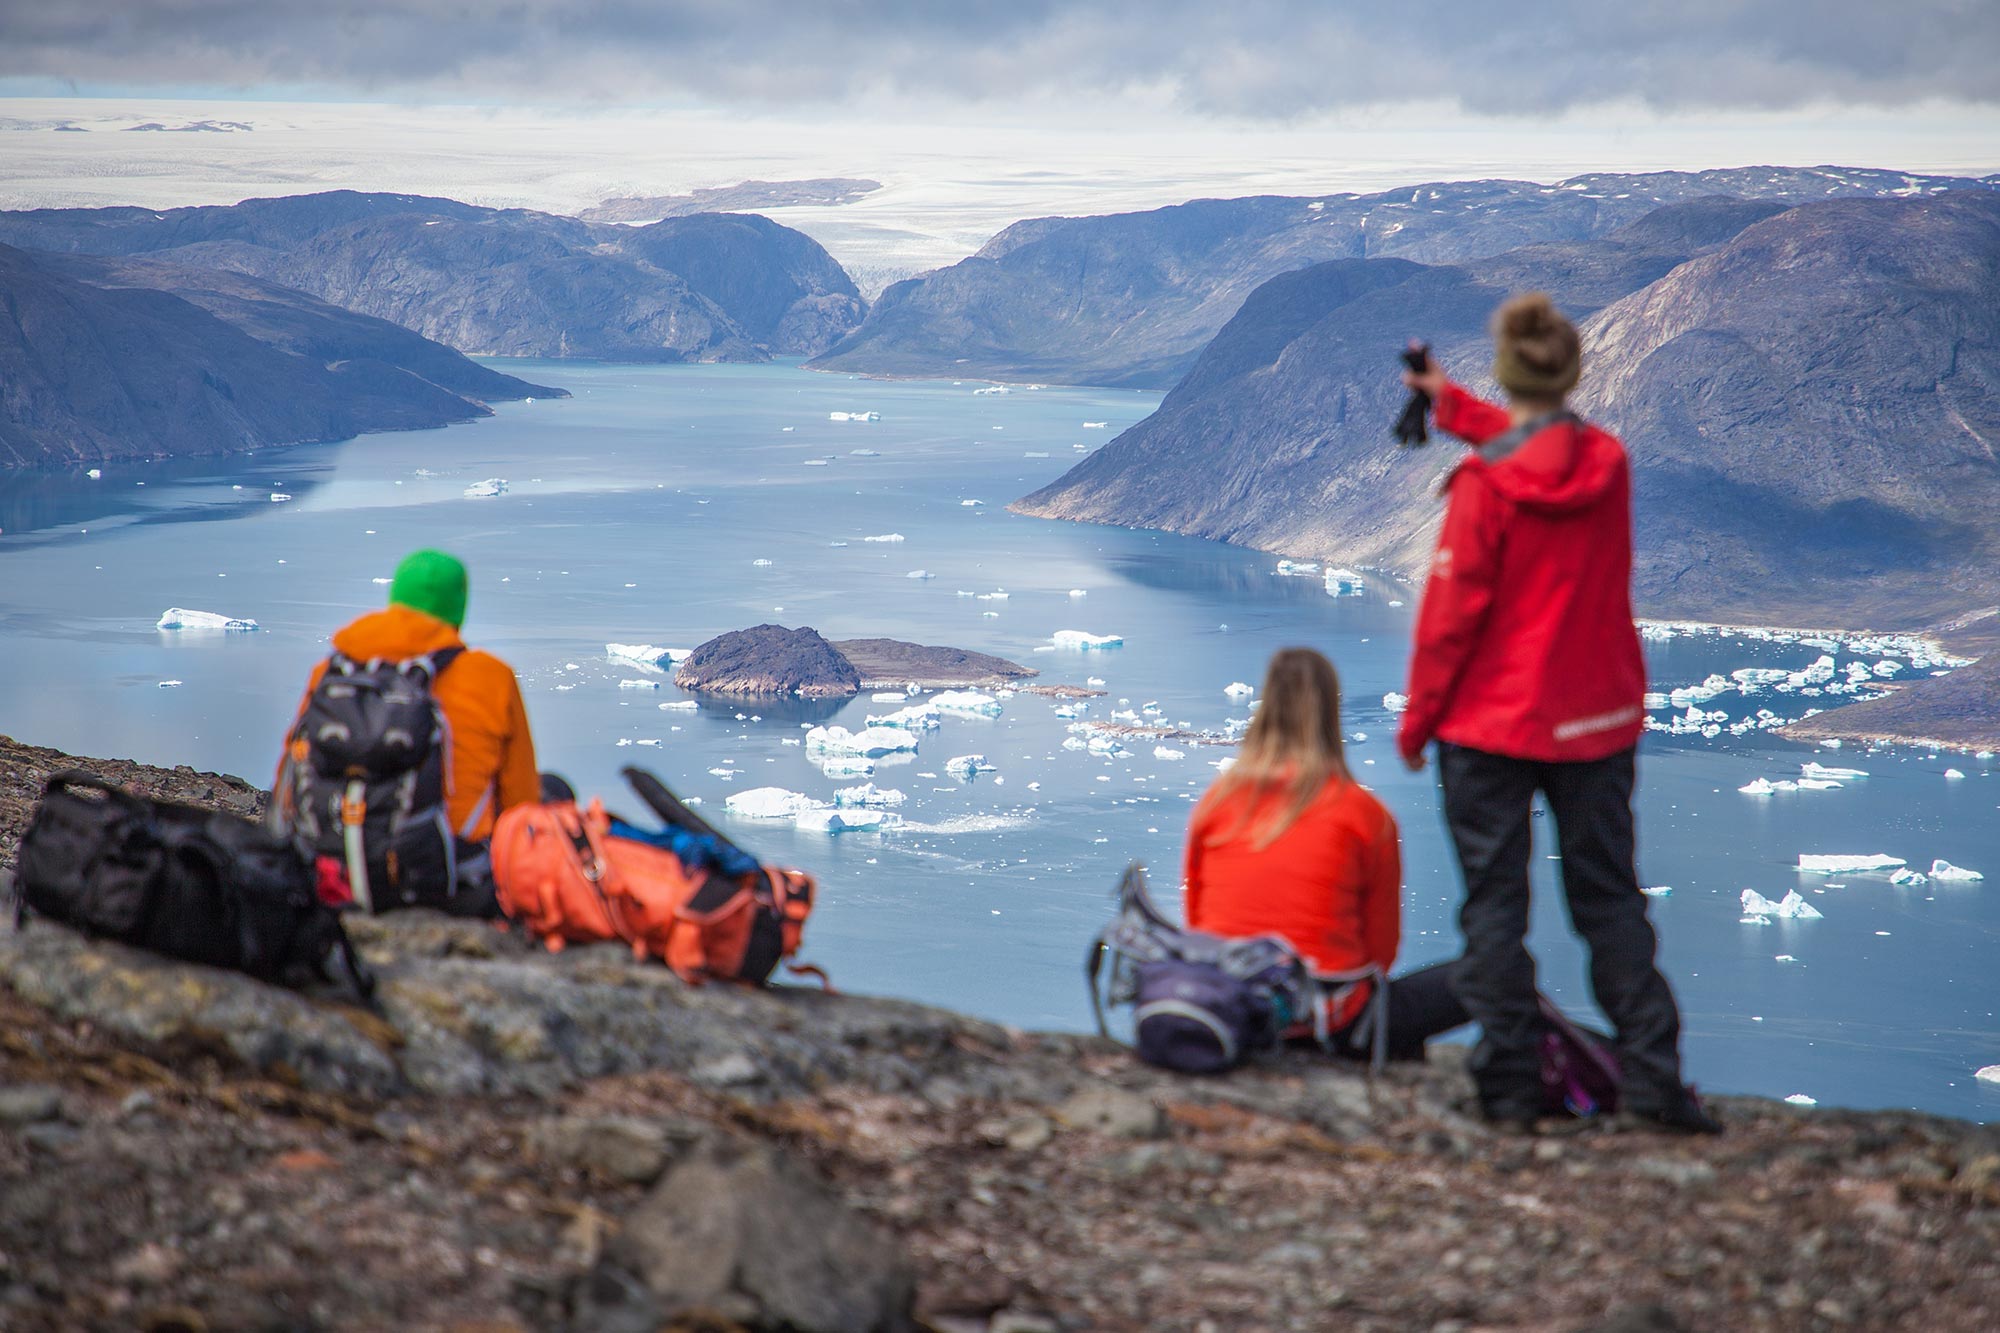 Scouting for adventures, Greenland, icebergs, fjords